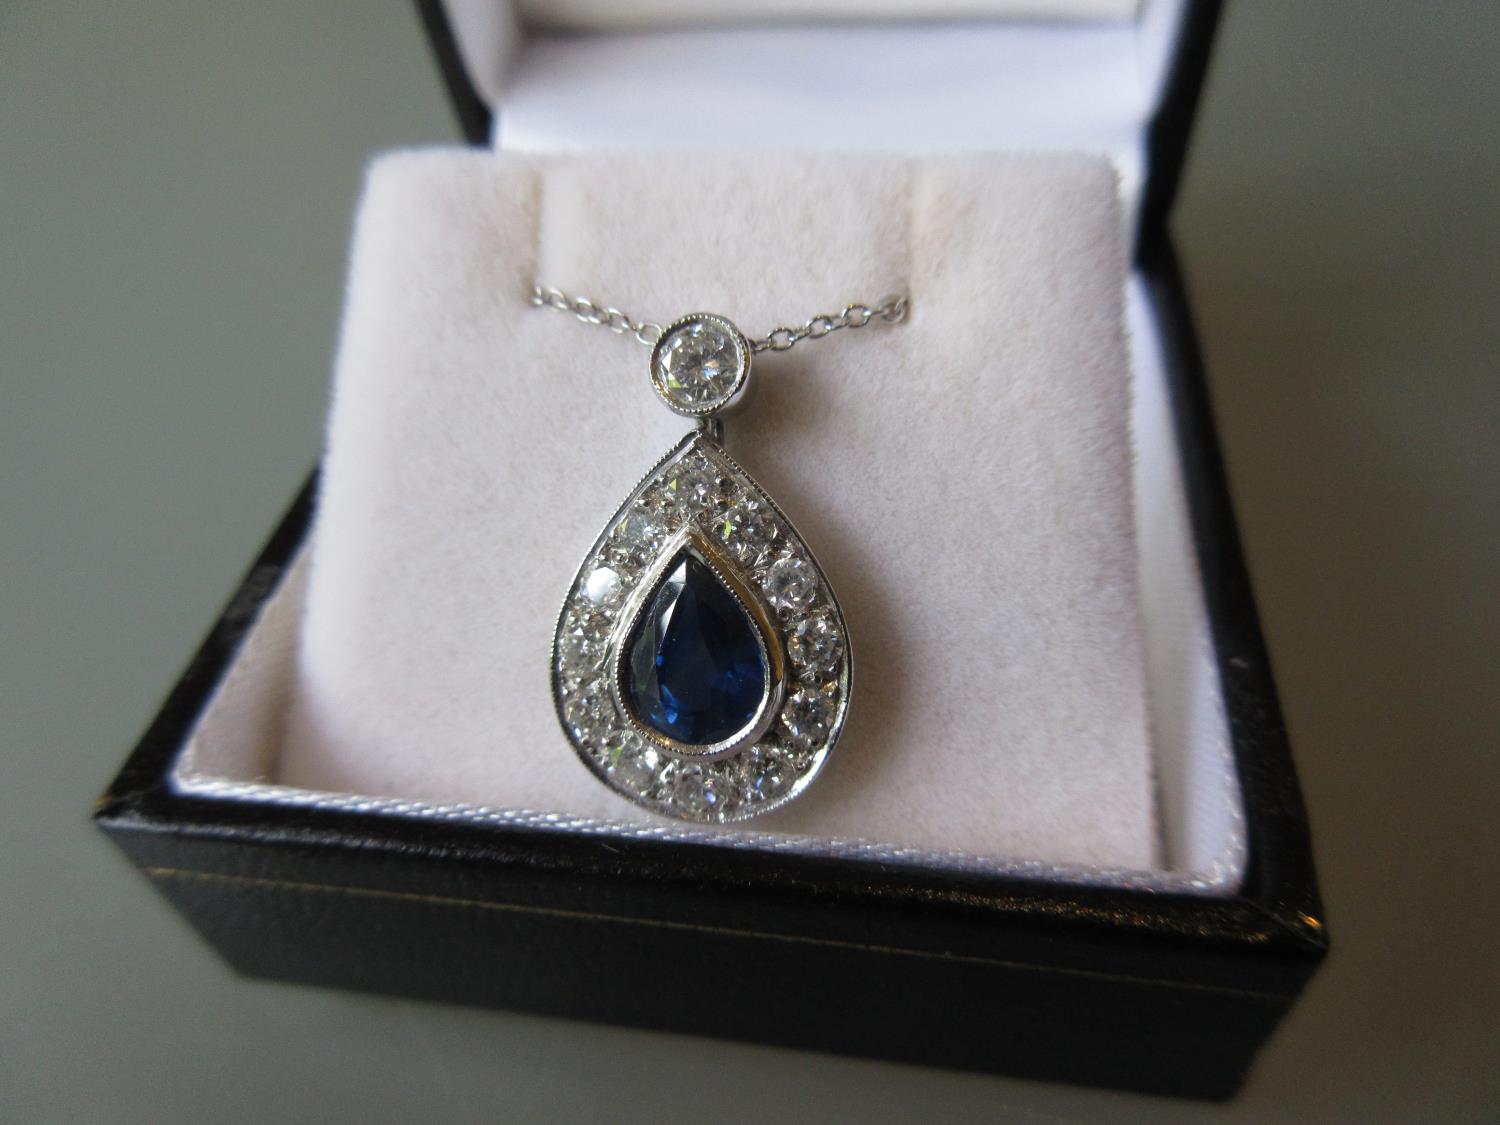 Good quality modern sapphire and diamond tear drop pendant on an 18ct white gold chain, the